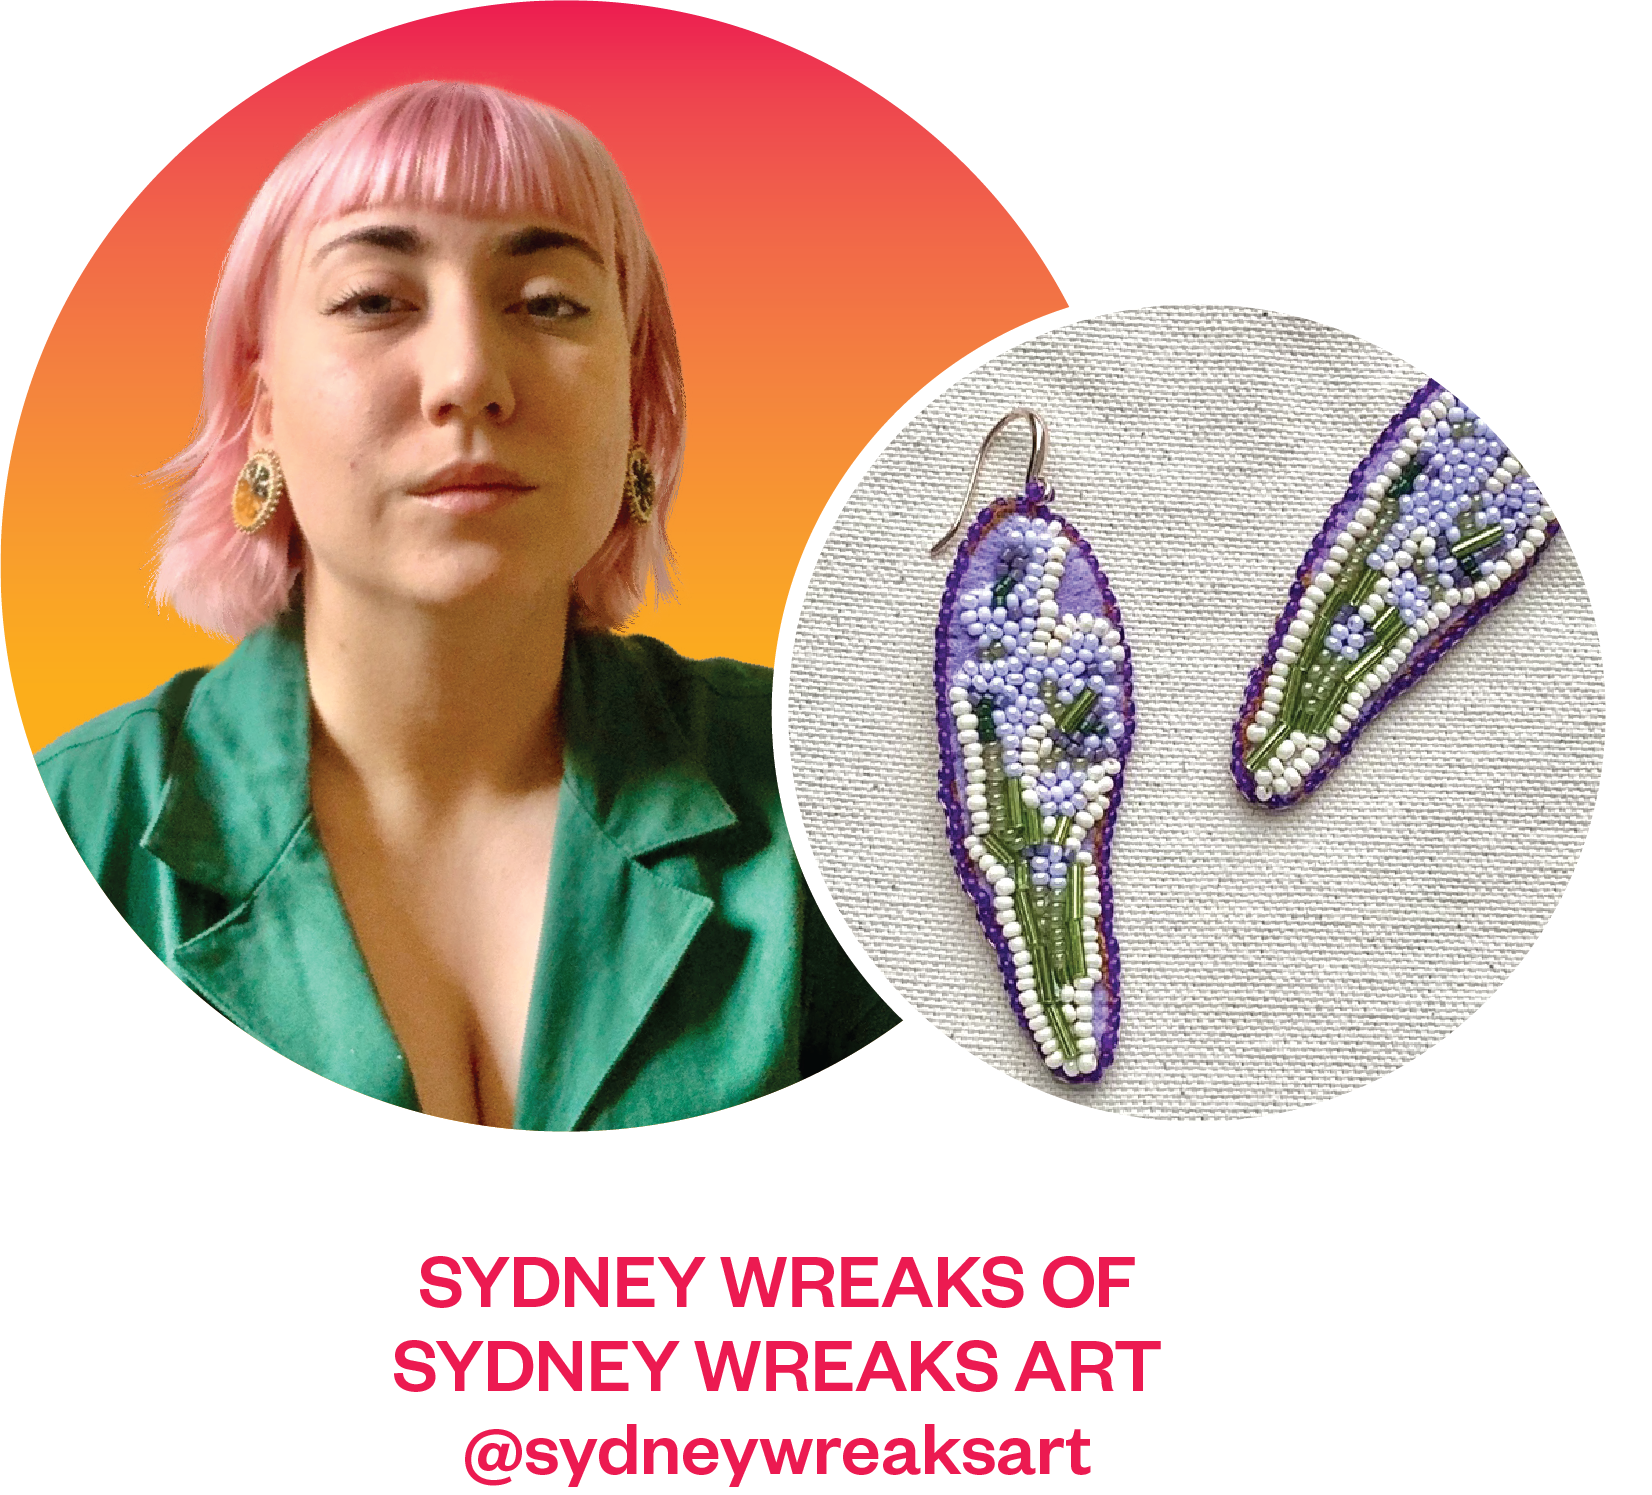 Circular image of Sydney smiling with pink and orange background overlapped by circular image of their beaded lavender earrings